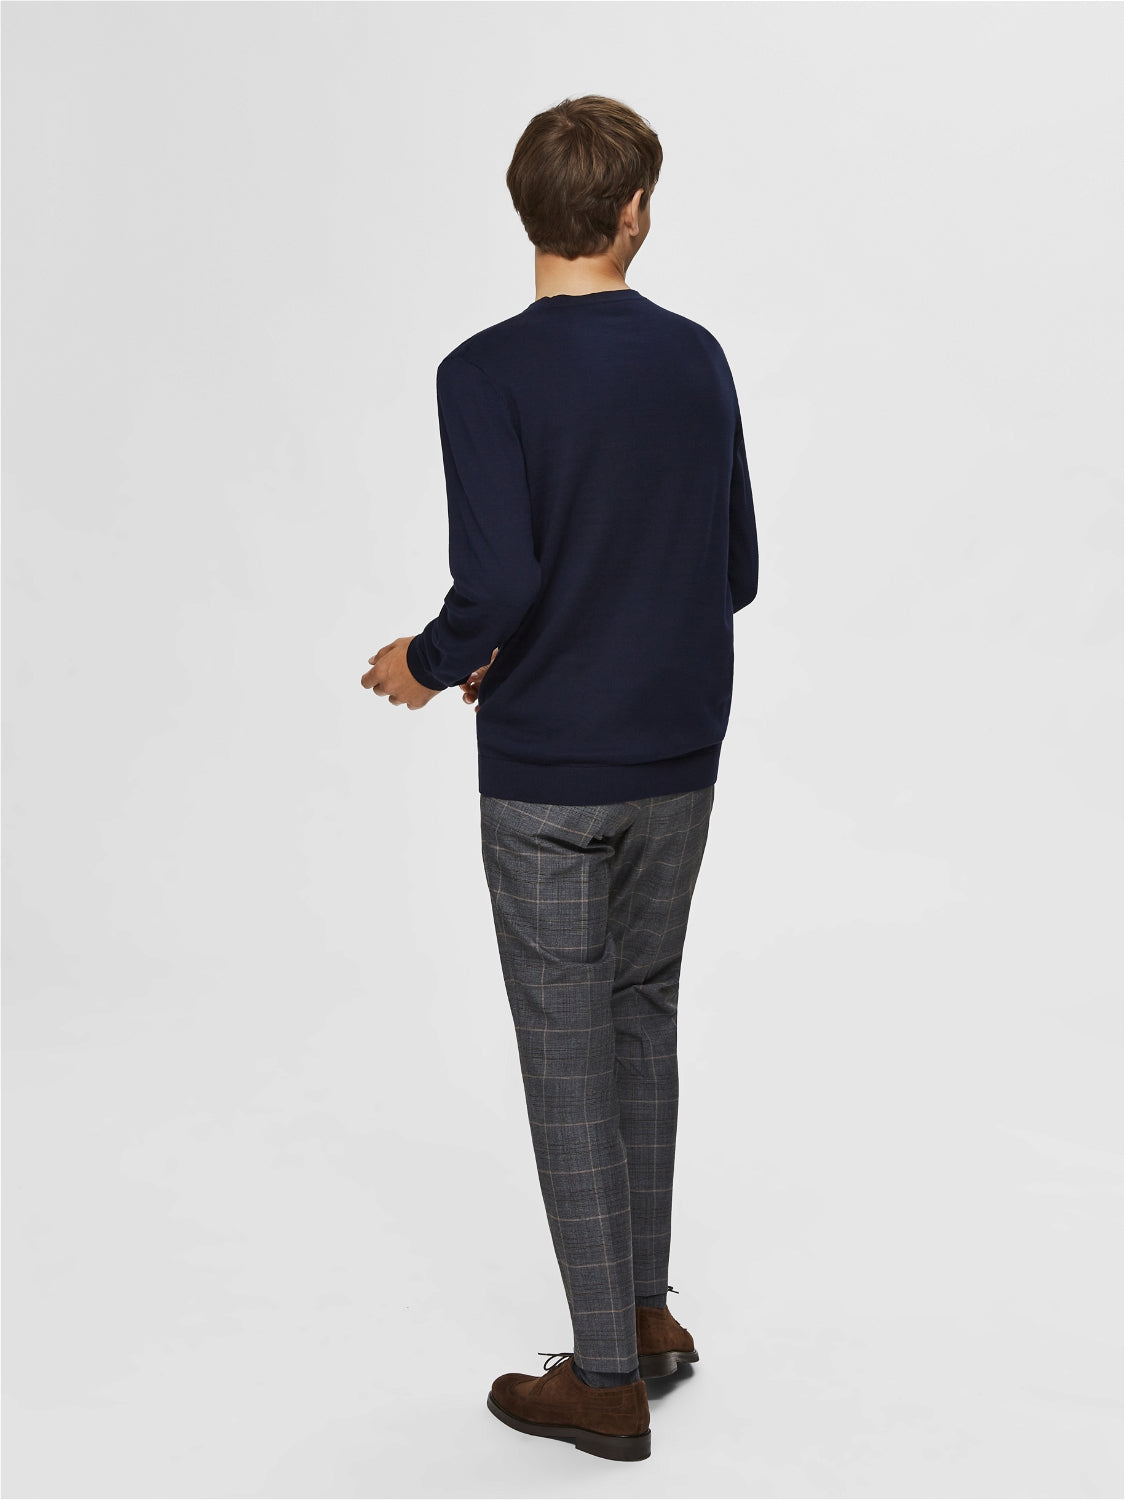 SELECTED HOMME Jumper Navy